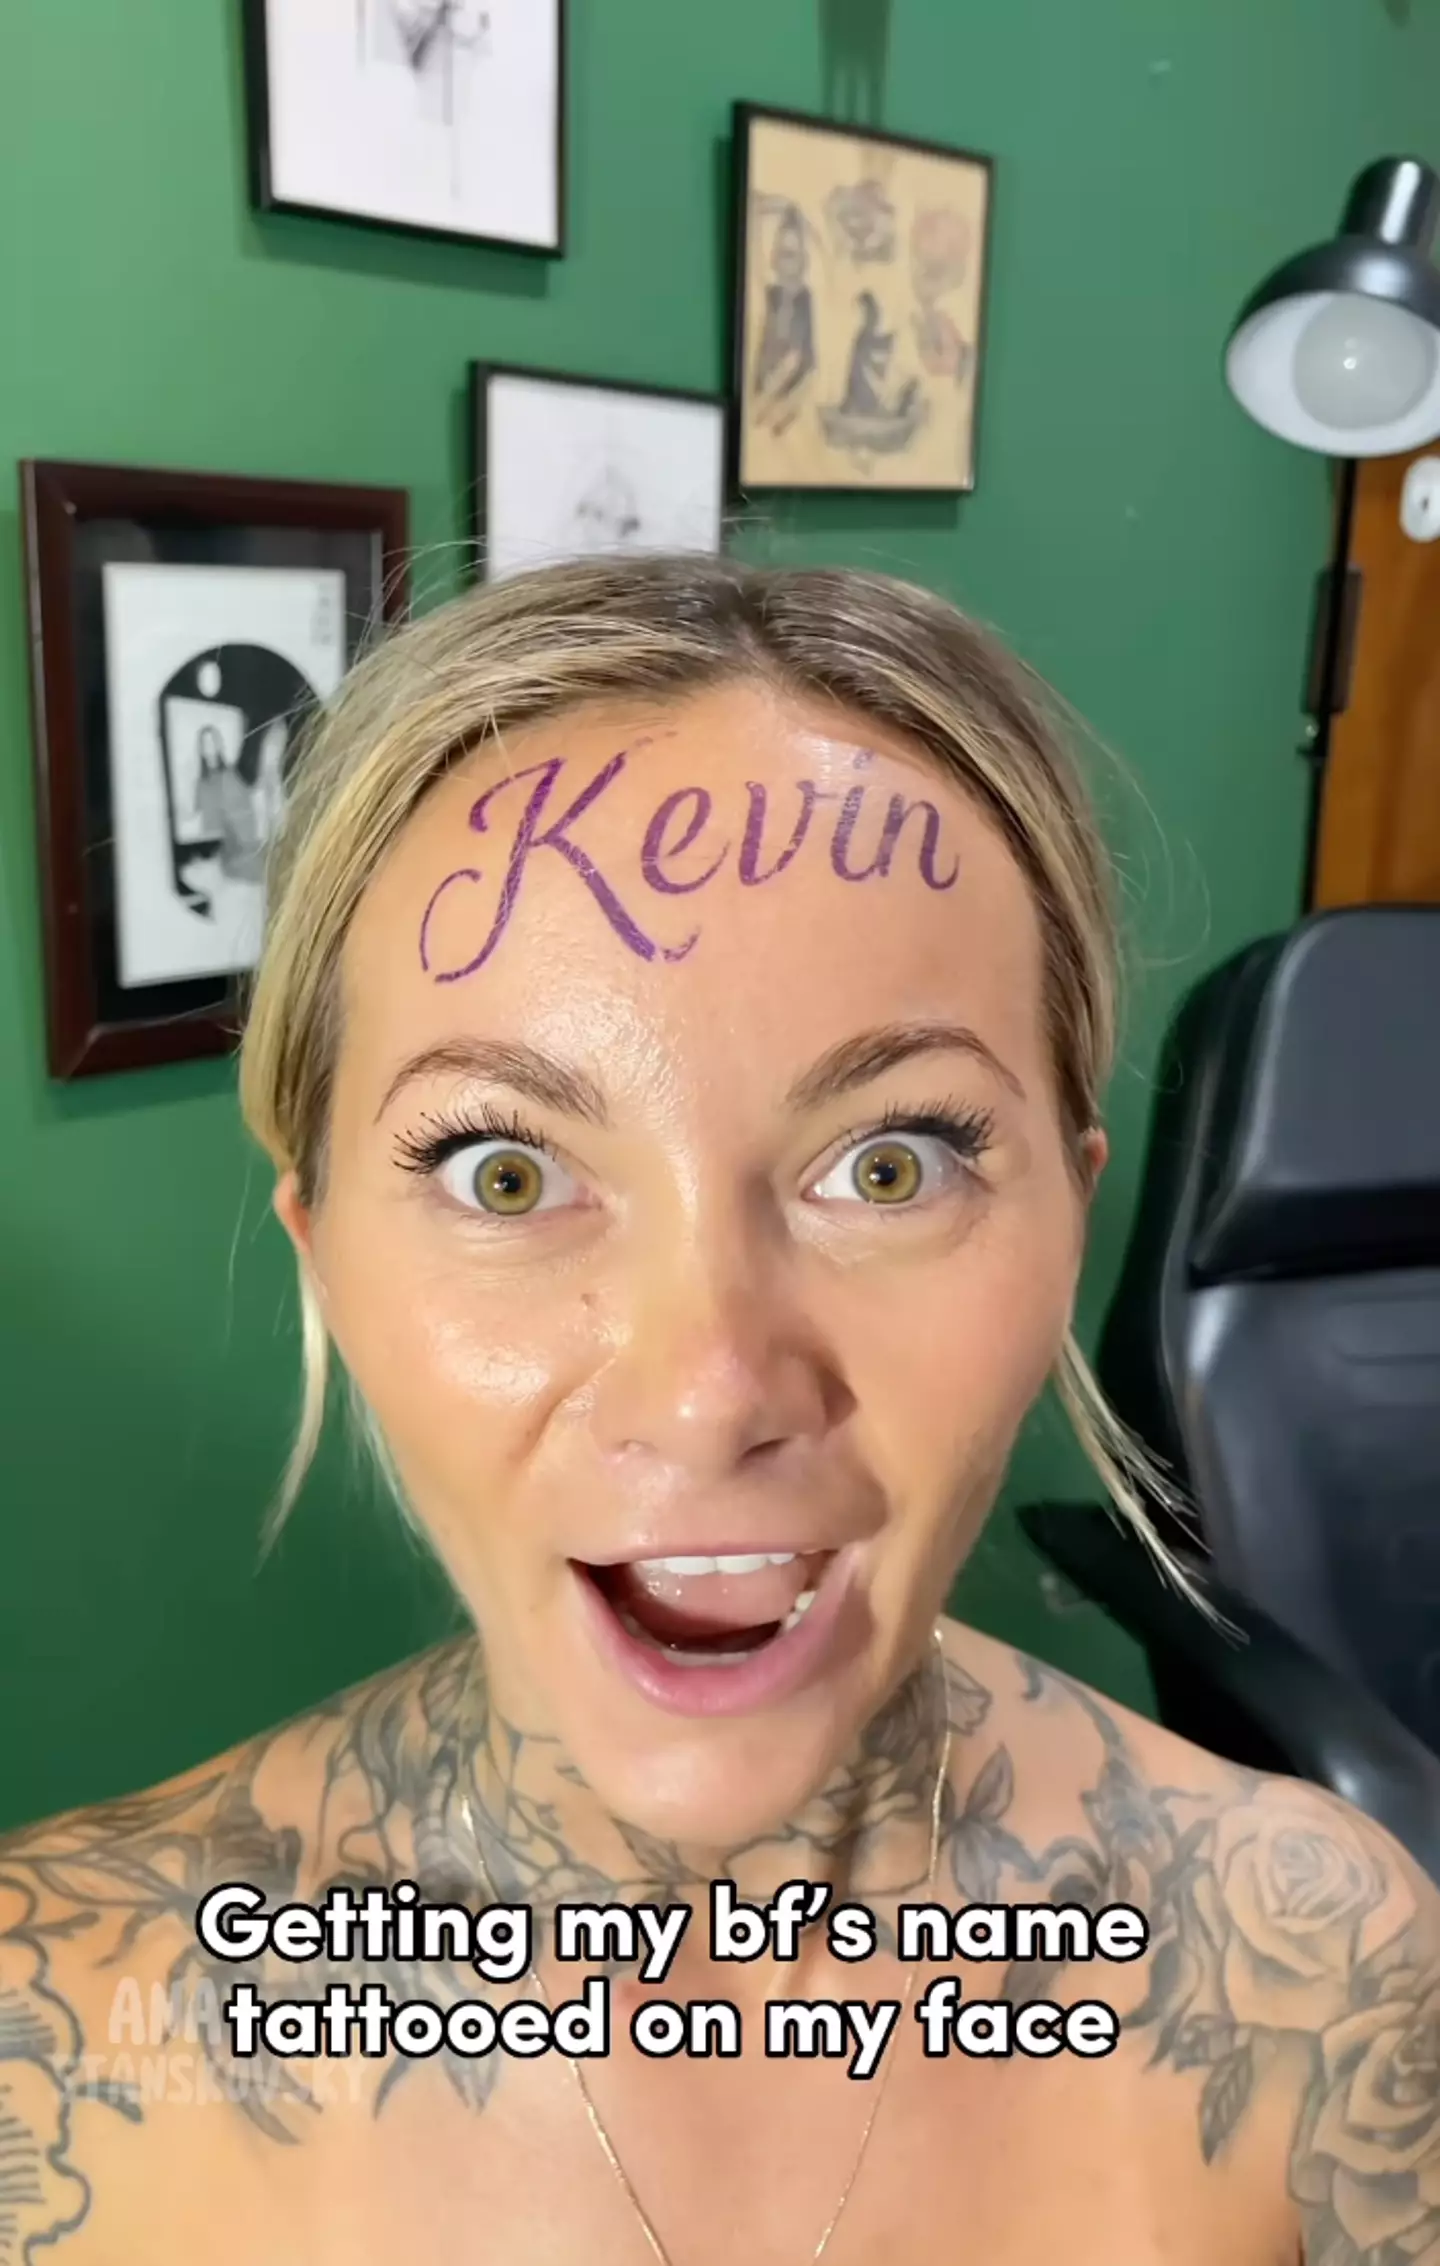 Ana Stanskovsky claims to have got 'KEVIN' tattooed on her head.